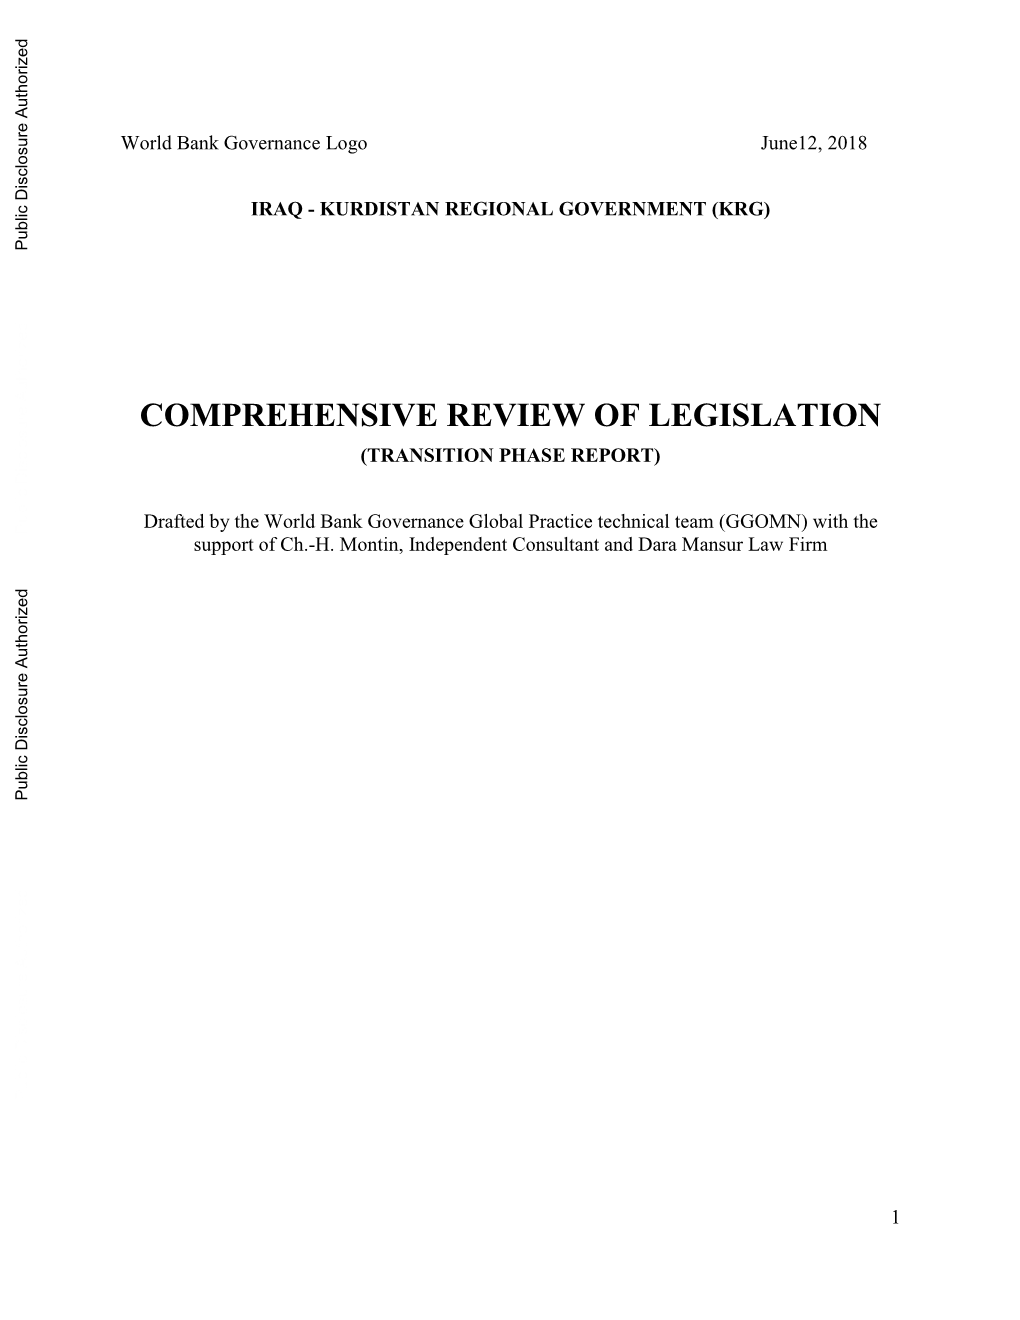 Comprehensive Review of Legislation (Transition Phase Report)